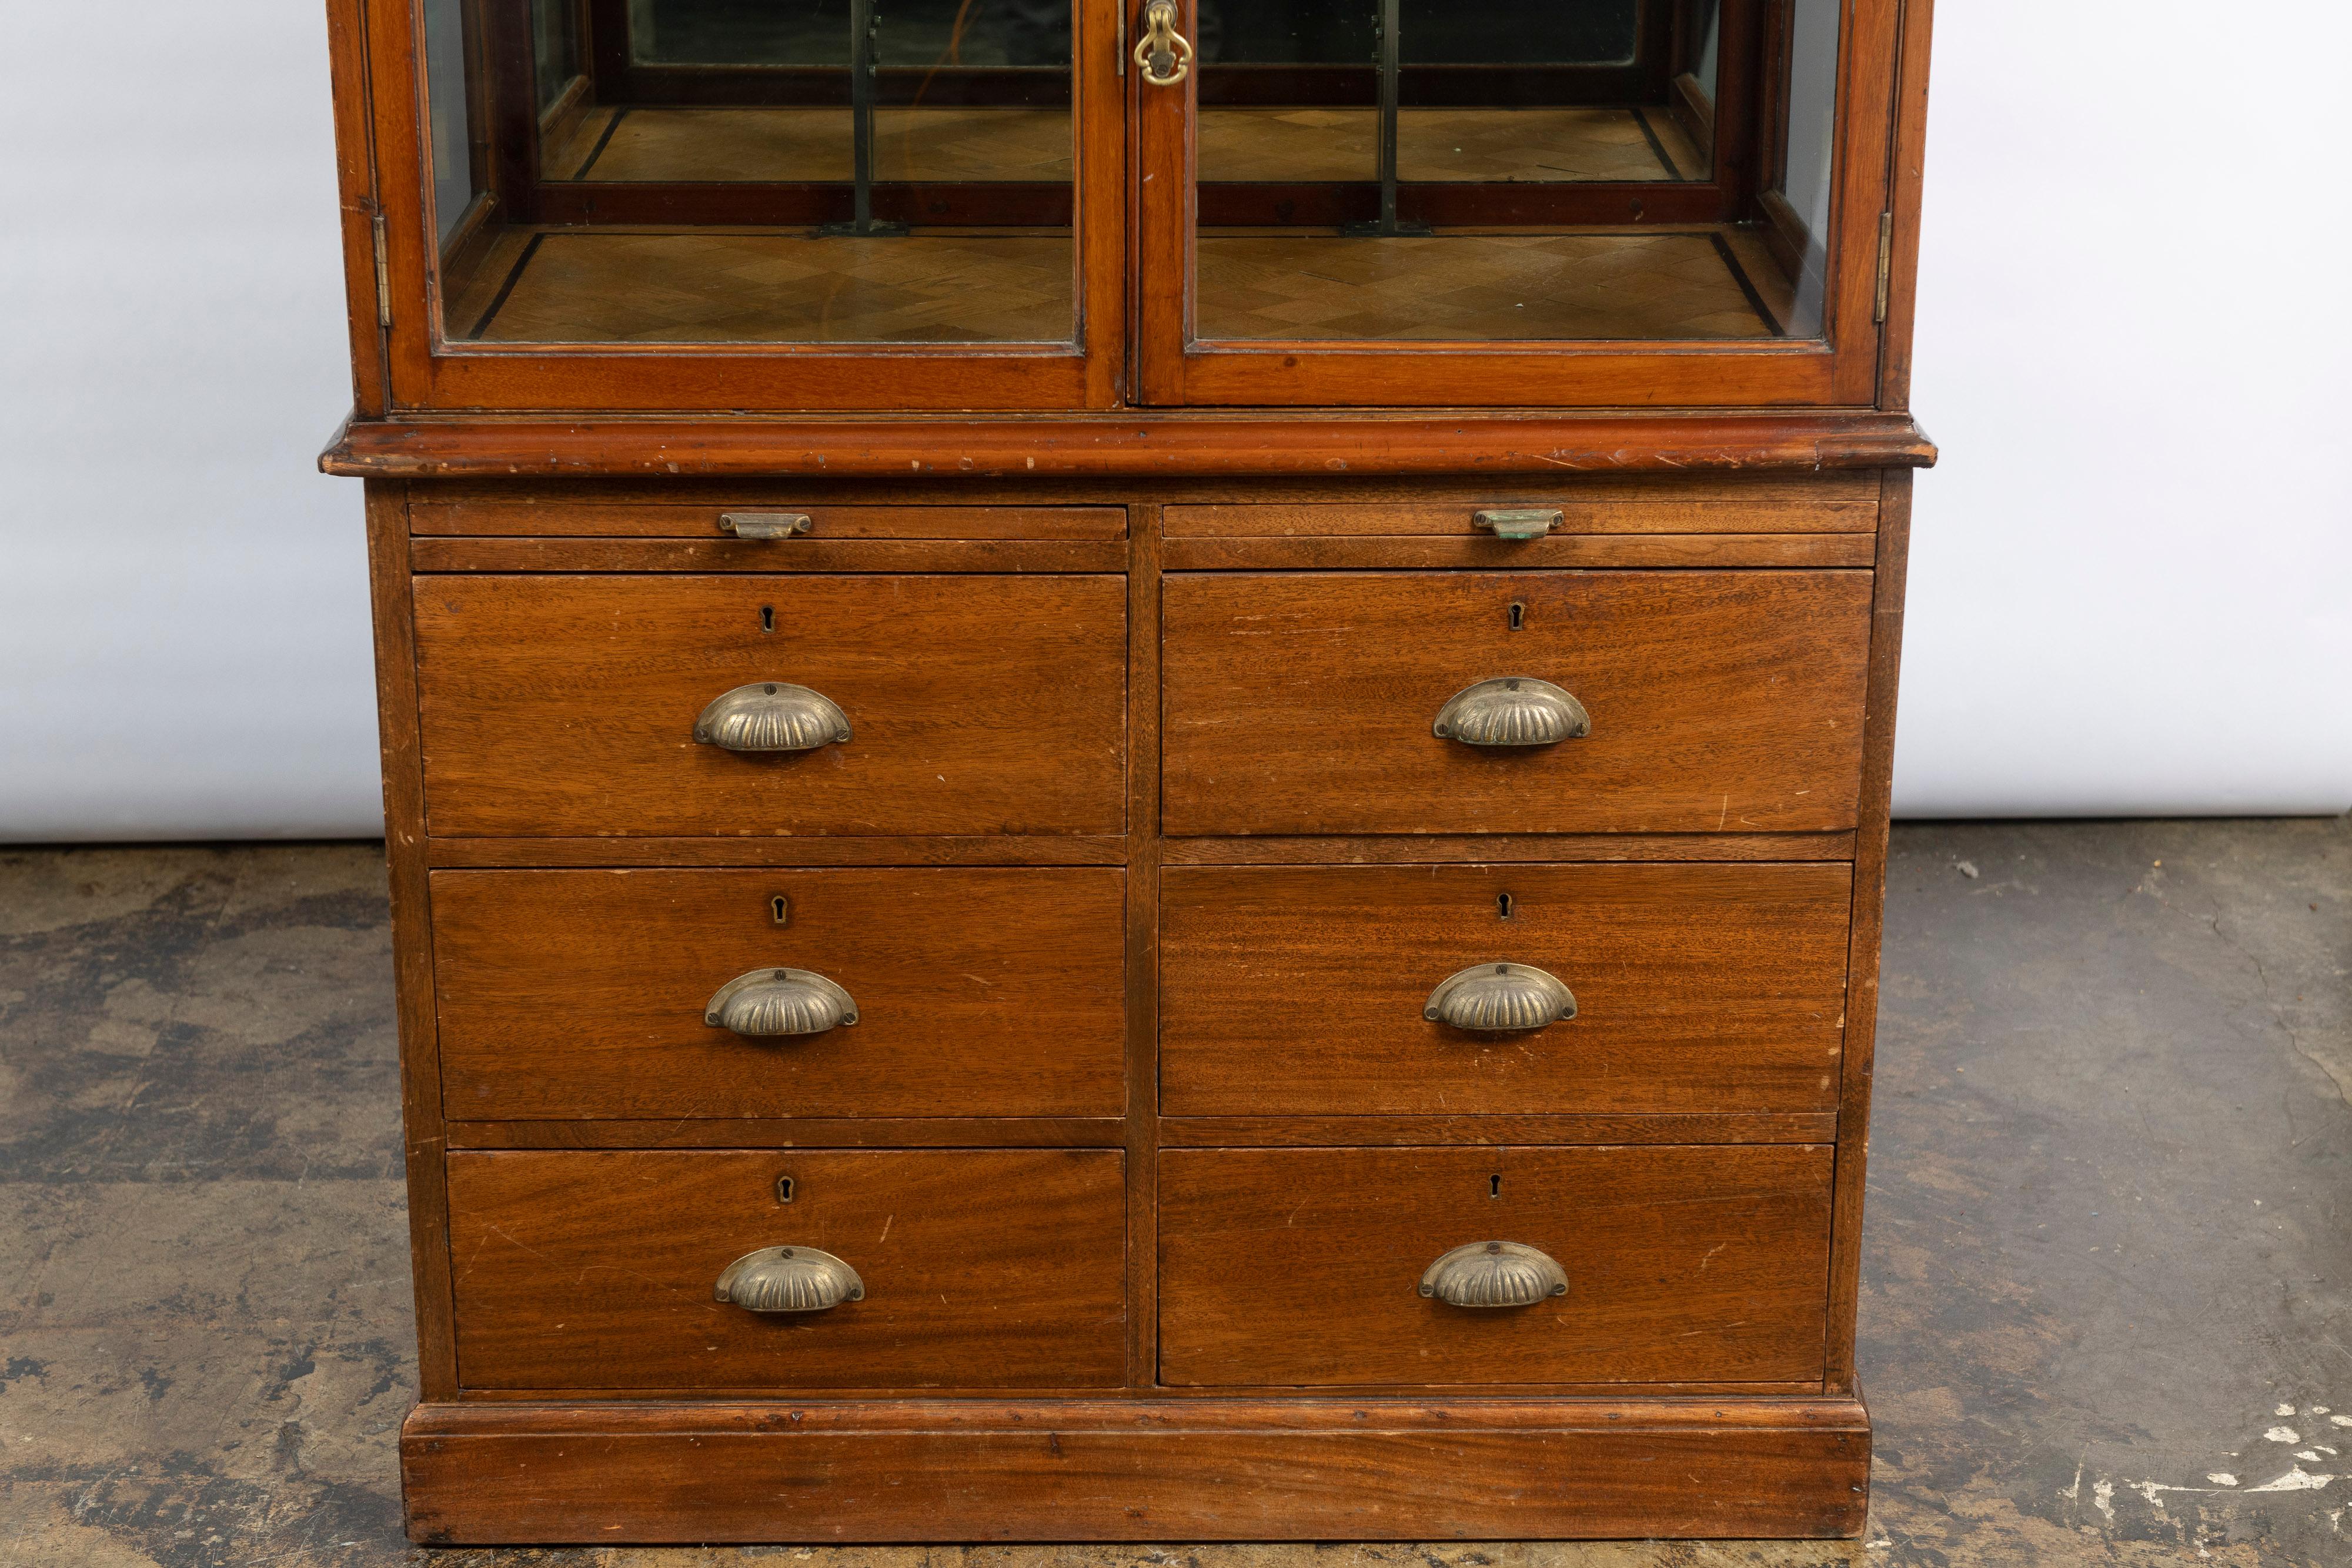 Antique English Haberdashery or Apothecary Cabinet, with Wood and Glass In Good Condition For Sale In San Francisco, CA